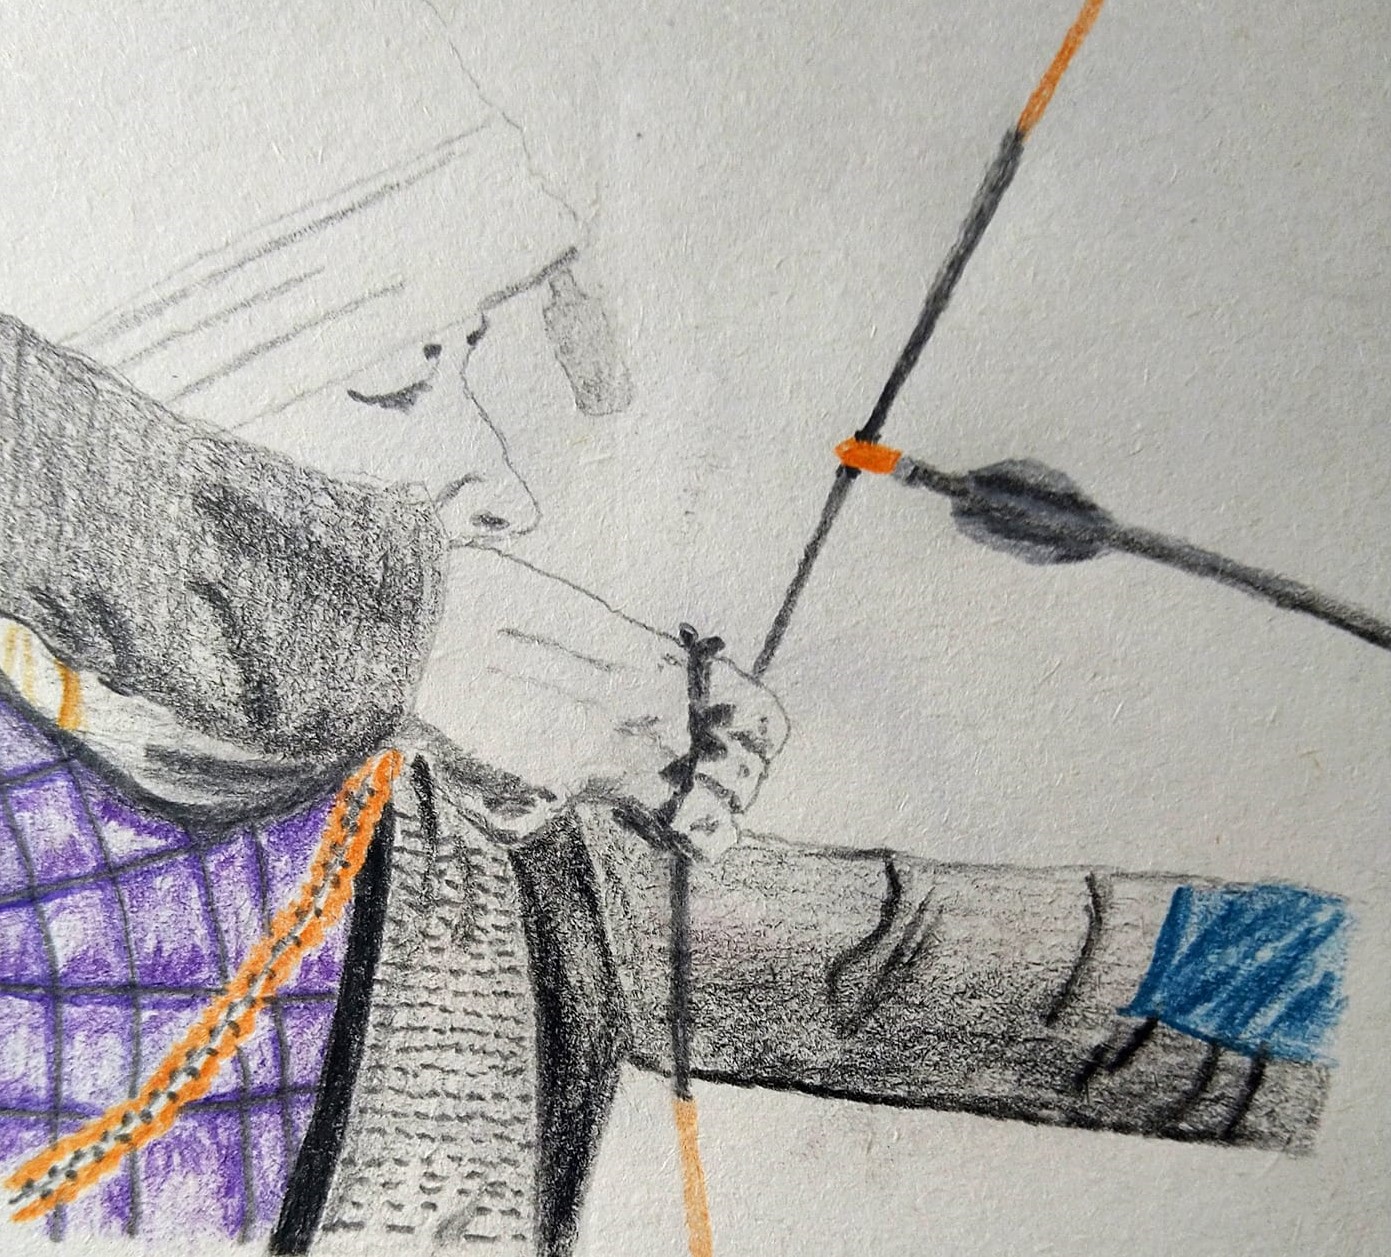 Colour drawing of an barebow archer in the process of drawing an arrow